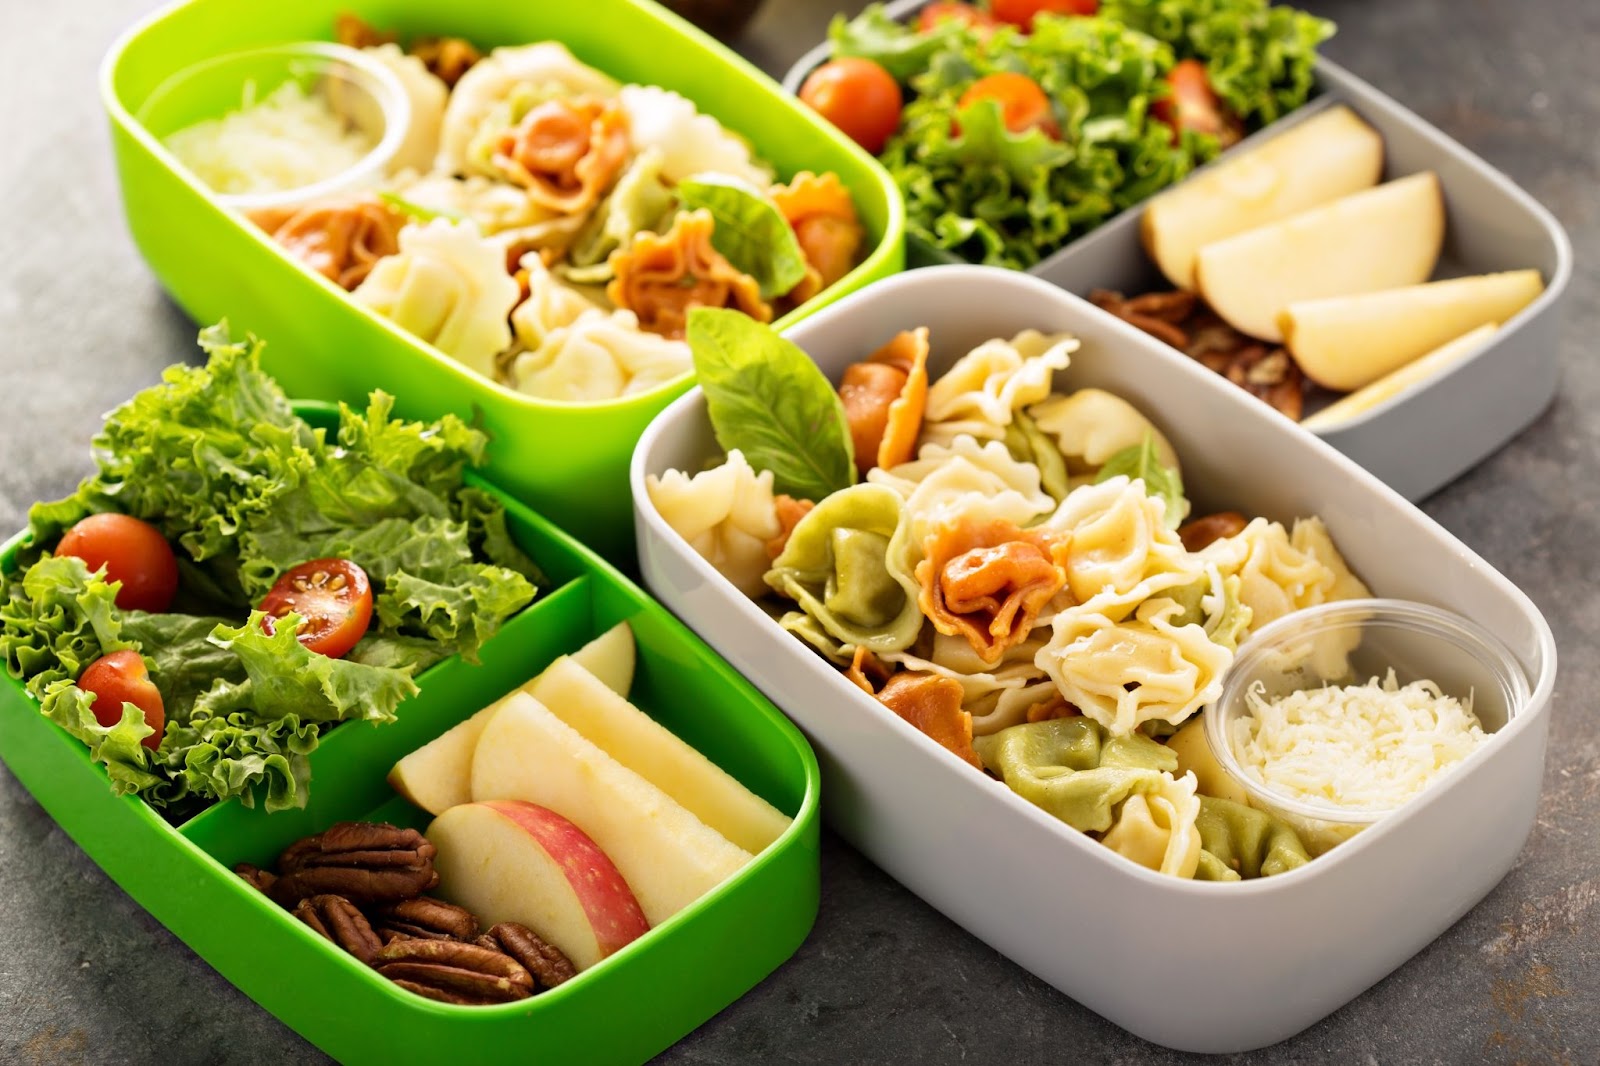 Healthy foods packed into to-go containers